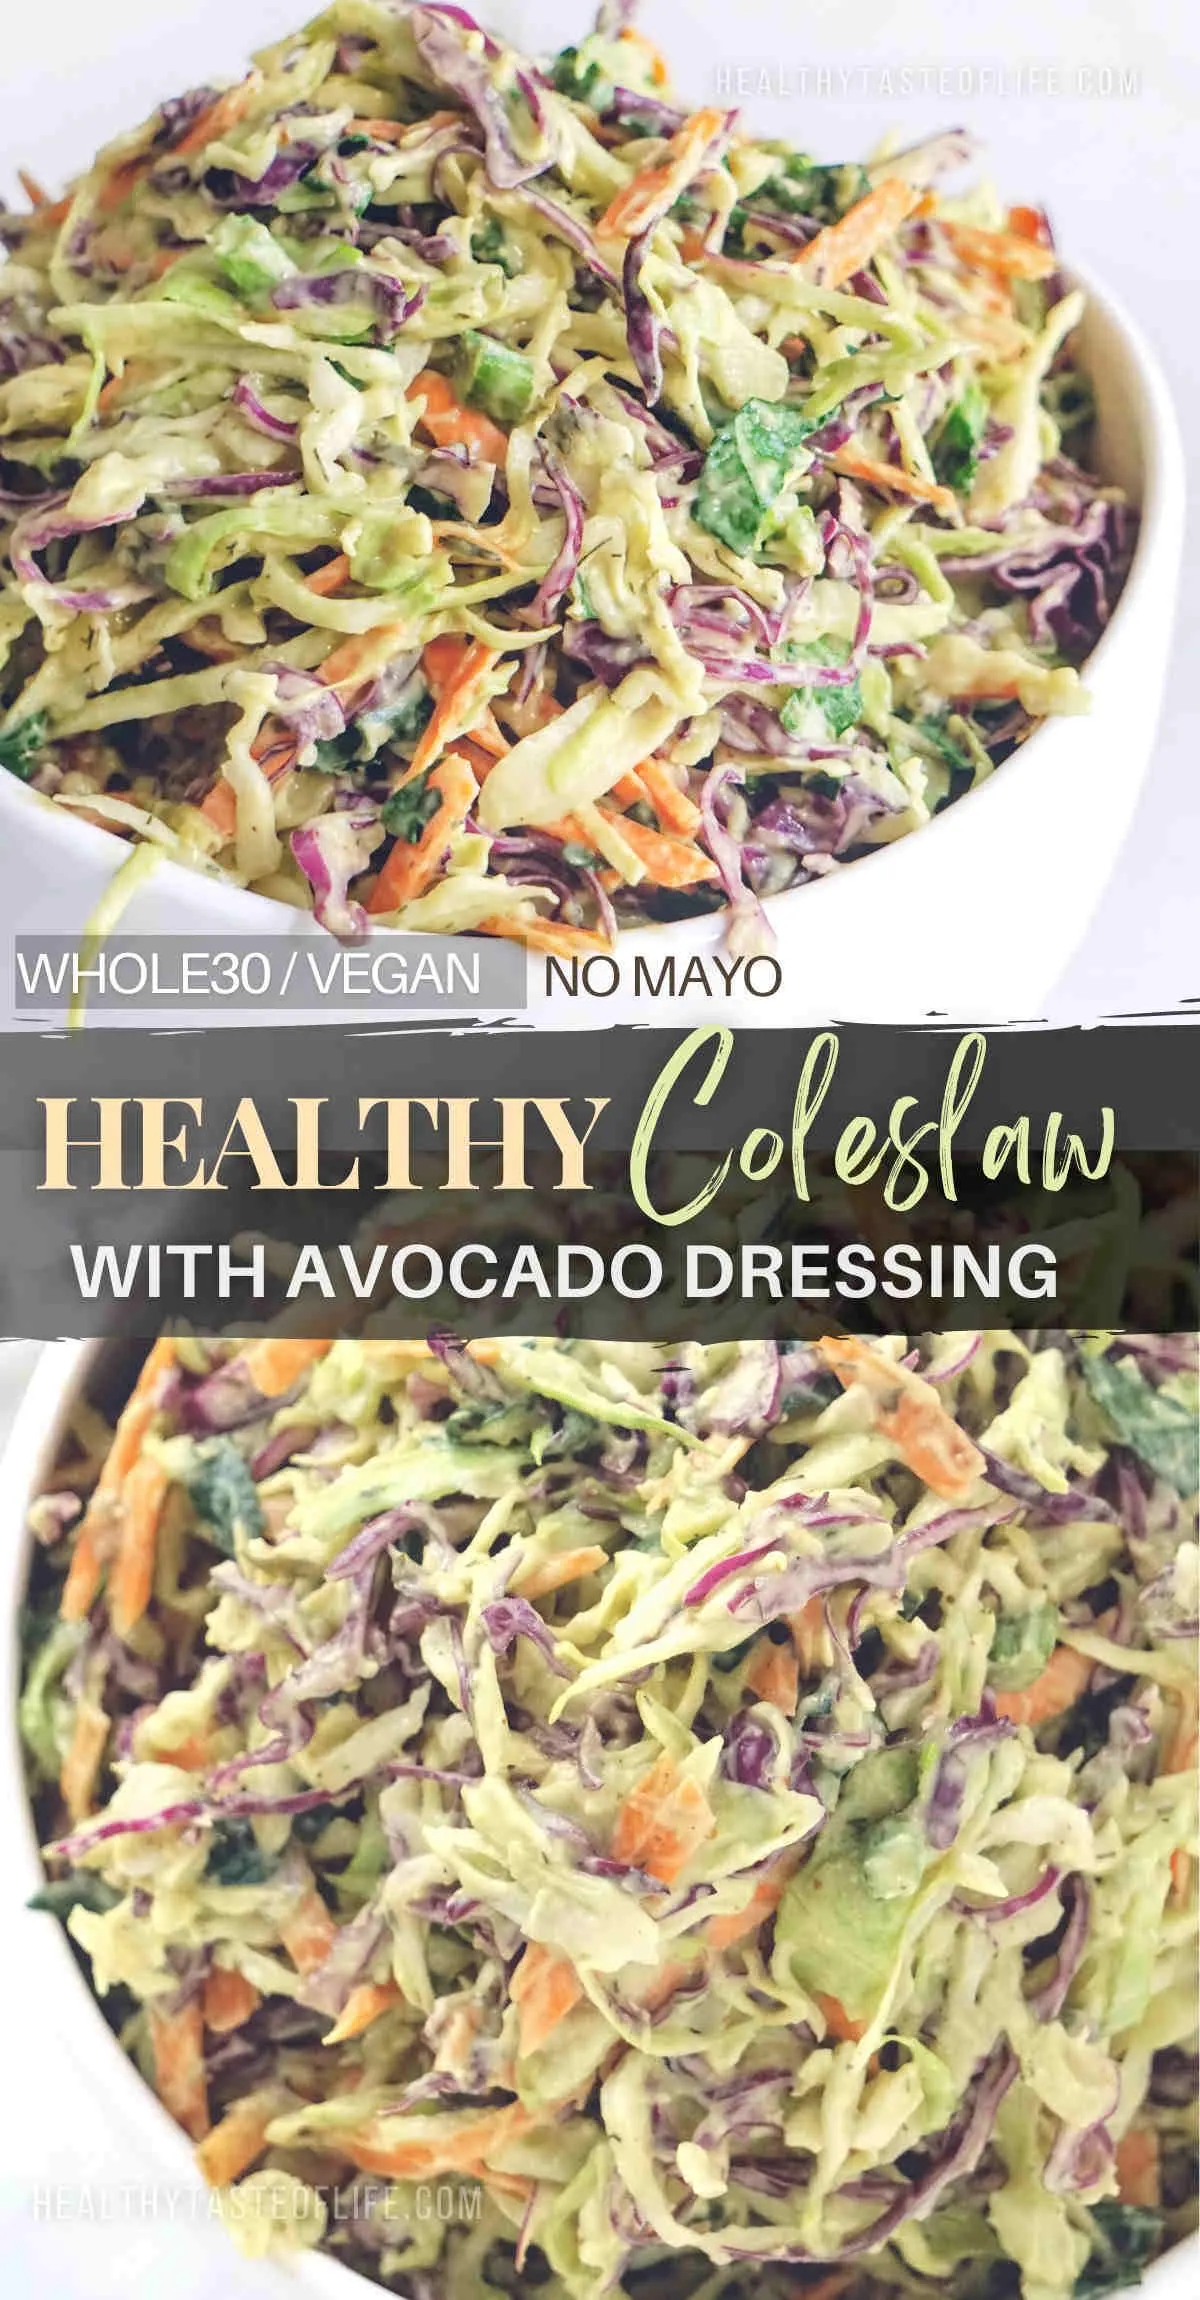 This healthy coleslaw recipe is a healthier version of the classic summer cabbage salad tweaked to be mayo free, but still creamy, savory and full of crunchiness. The creamy avocado dressing coats perfectly the nutrient rich green / purple cabbage and carrots, making it taste just right. This simple, healthy coleslaw recipe is vegan, whole30, paleo dairy free and perfect for clean eating  picnics with your favorite grilling recipes. #healthycoleslaw #cleaneating #vegan #whole30 #coleslaw #nomayo